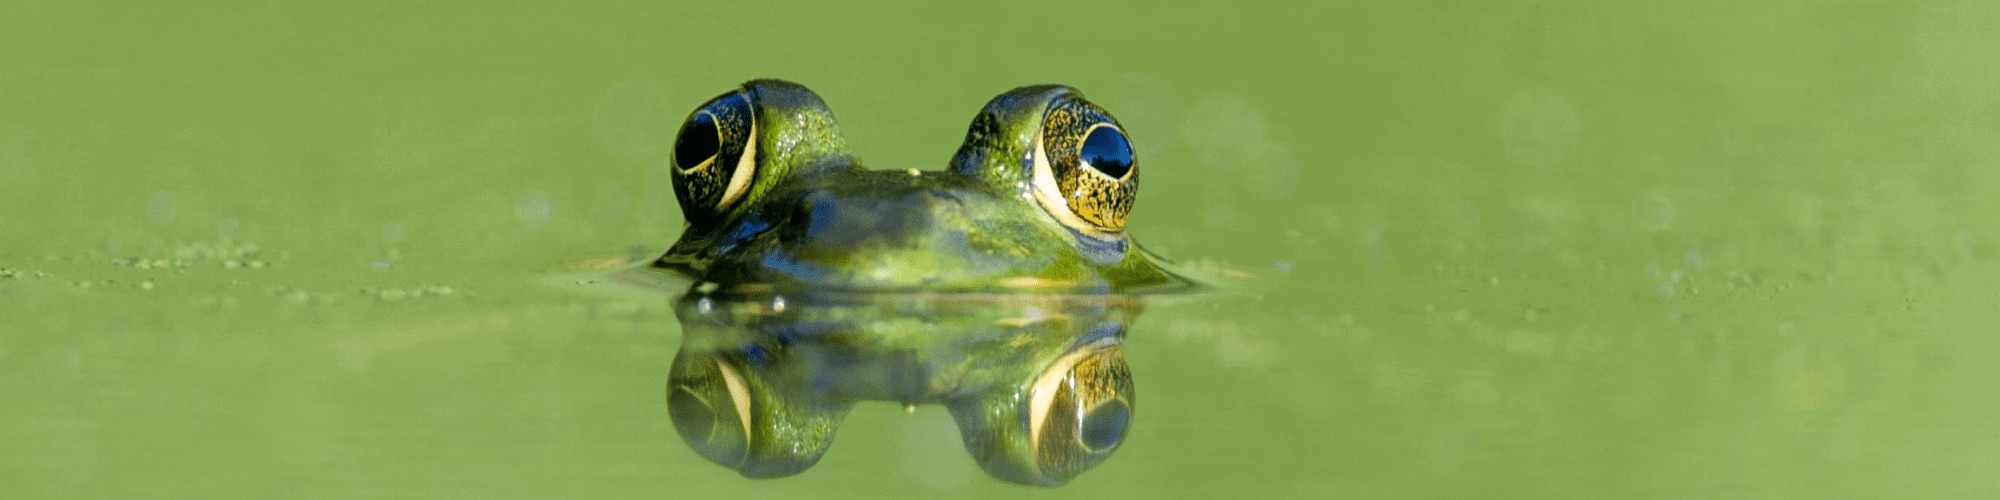 green frog with head above water